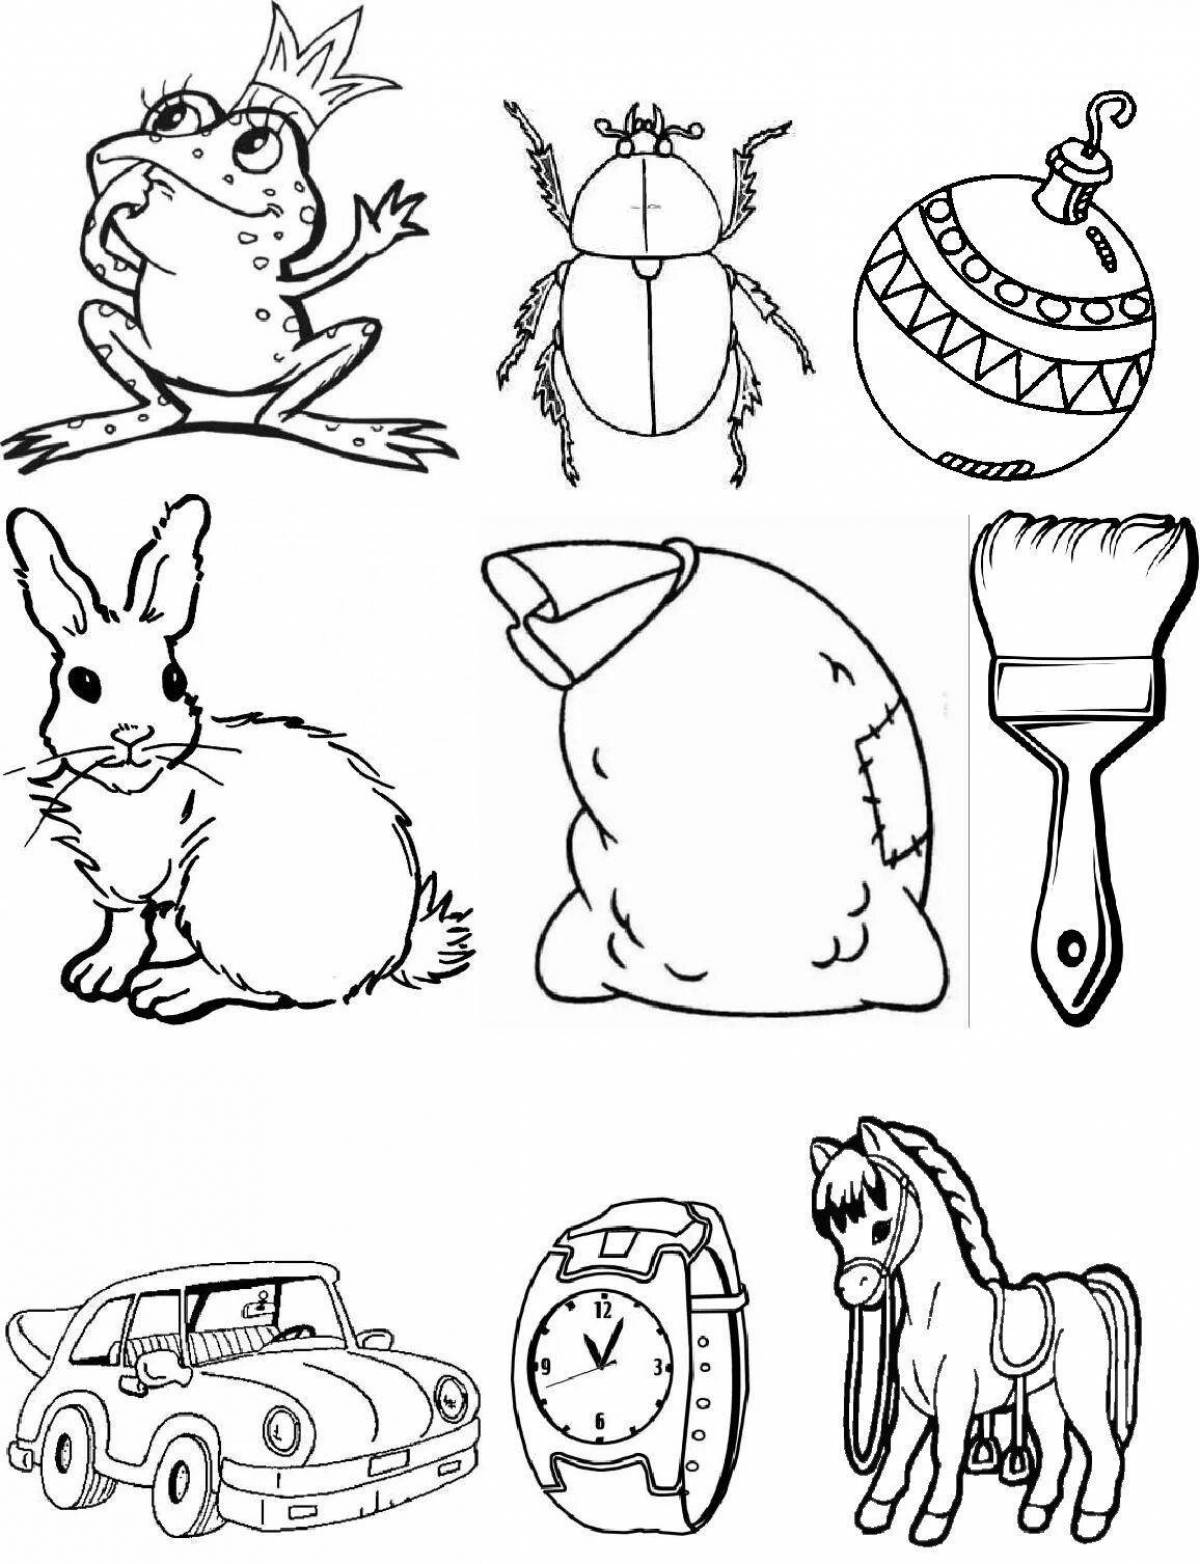 Colorful coloring page sh-beginning word